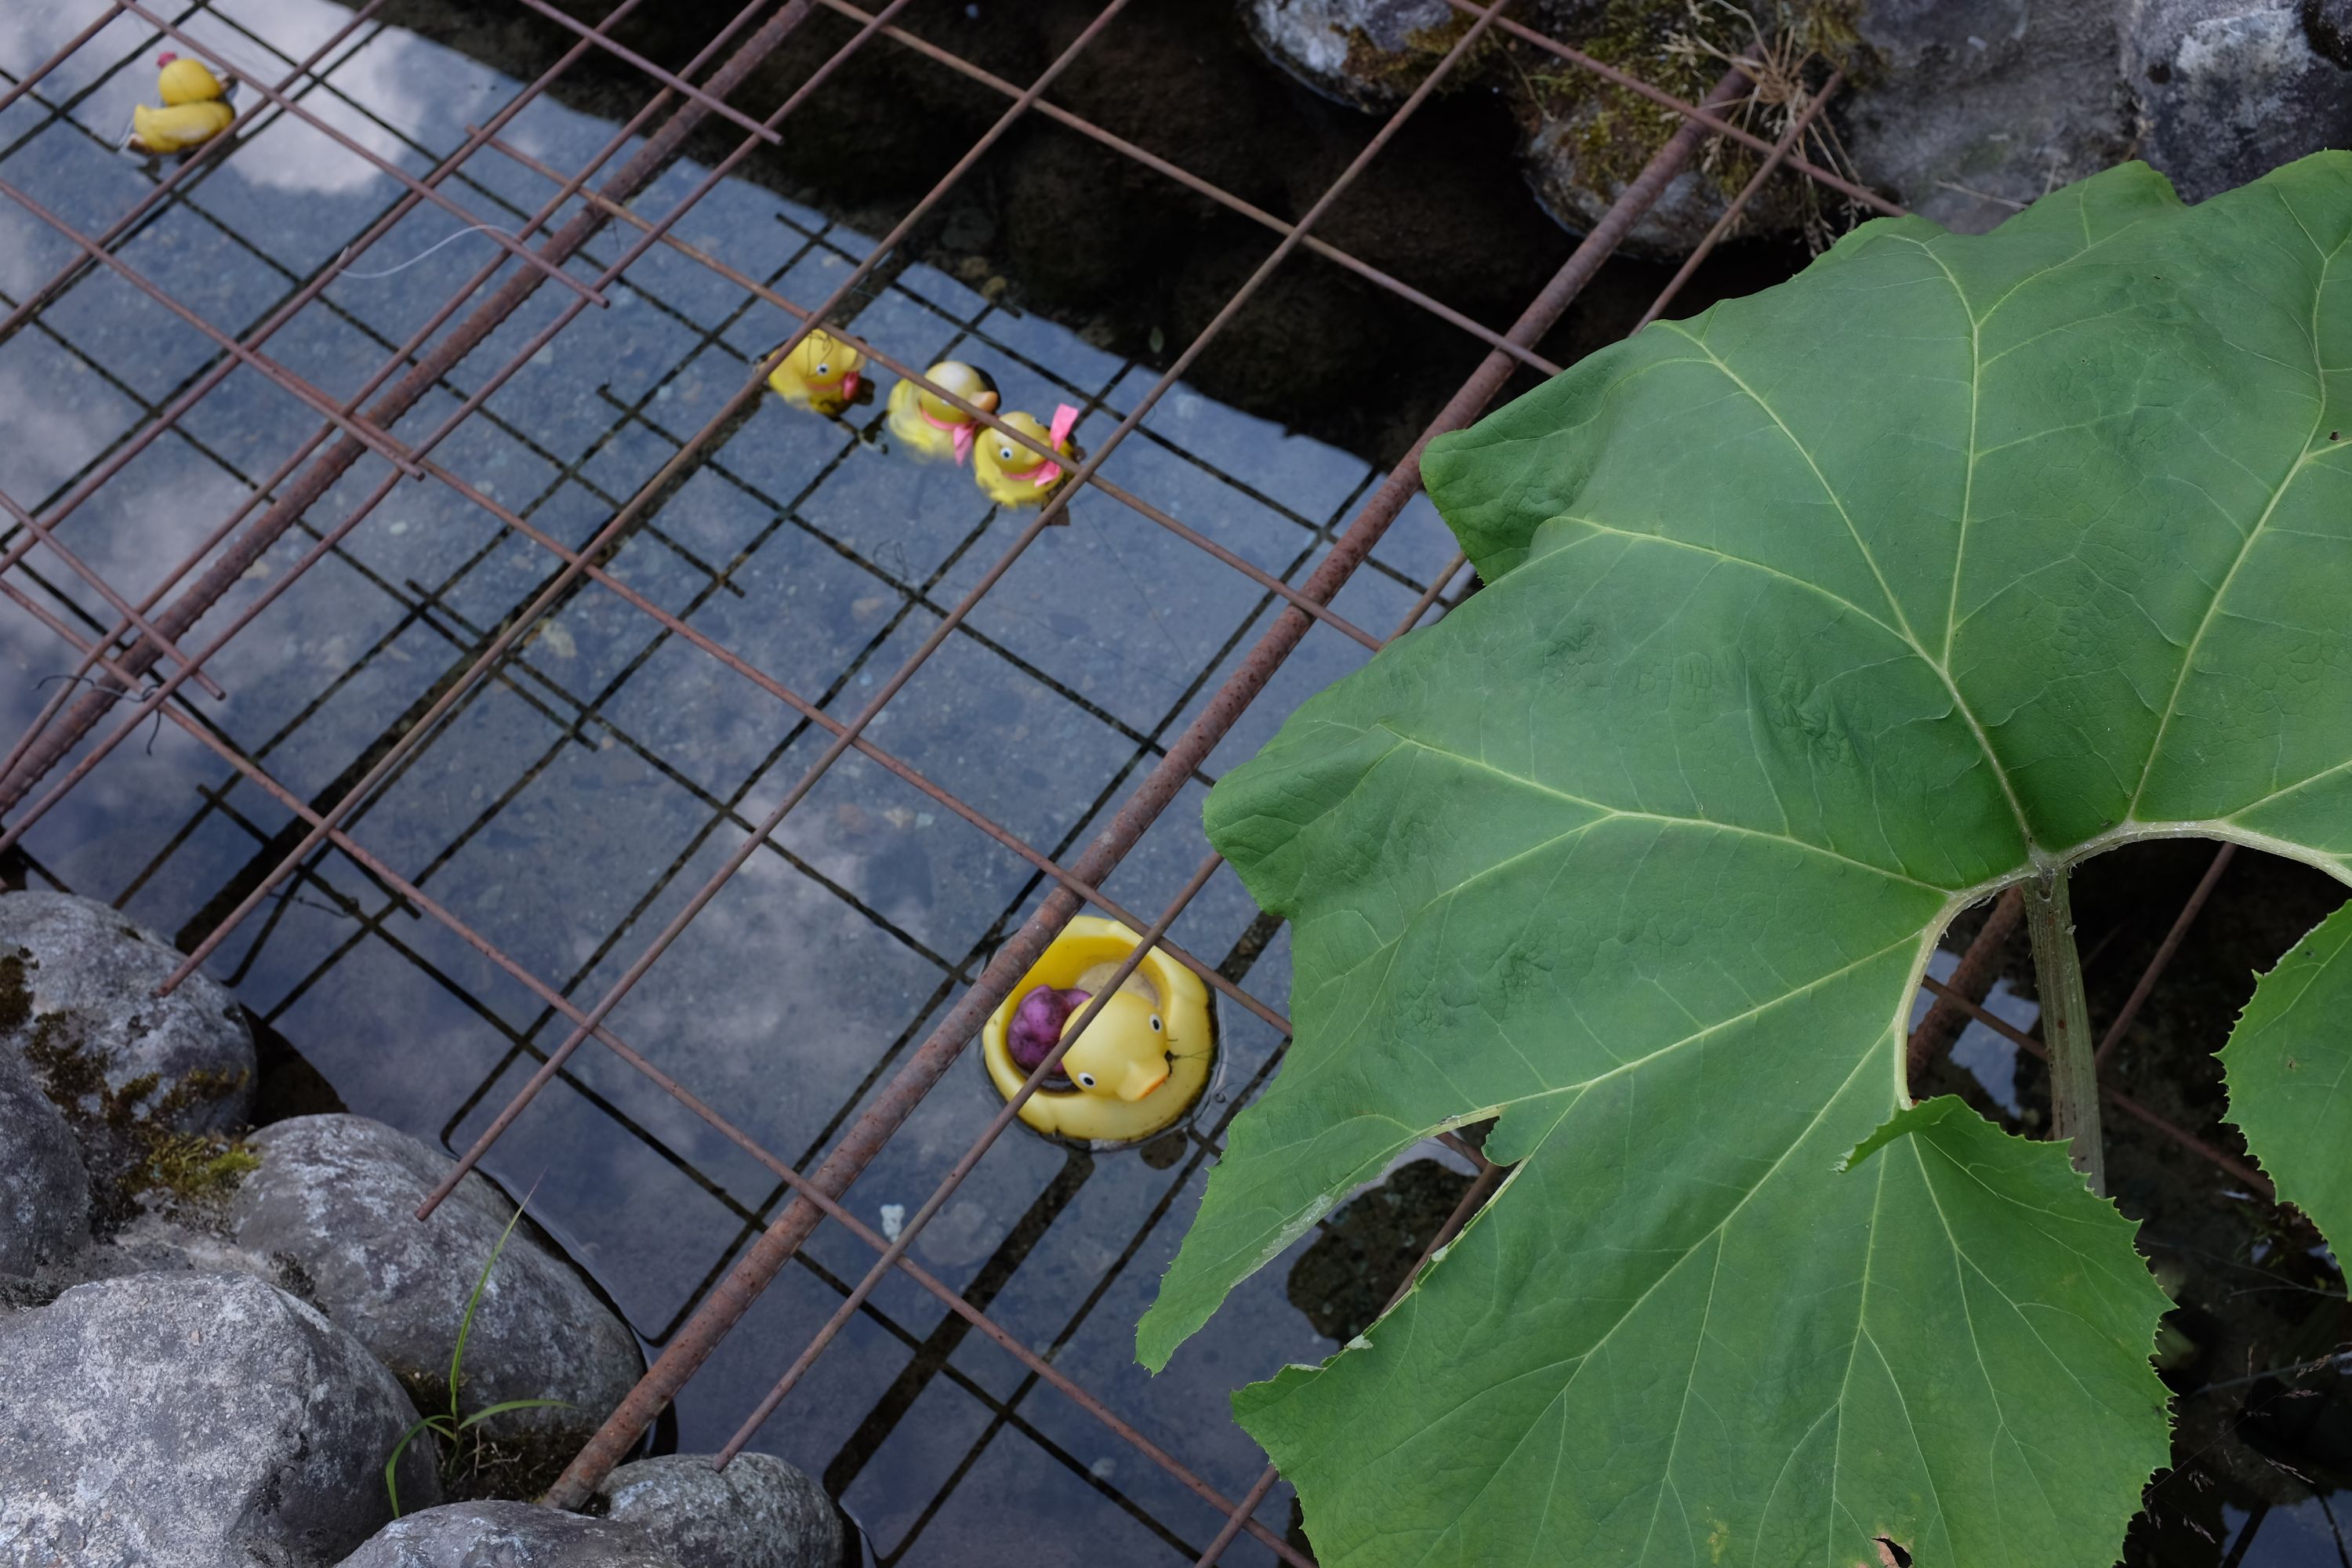 Yellow rubber ducks floating in an irrigation canal under a large green leaf.